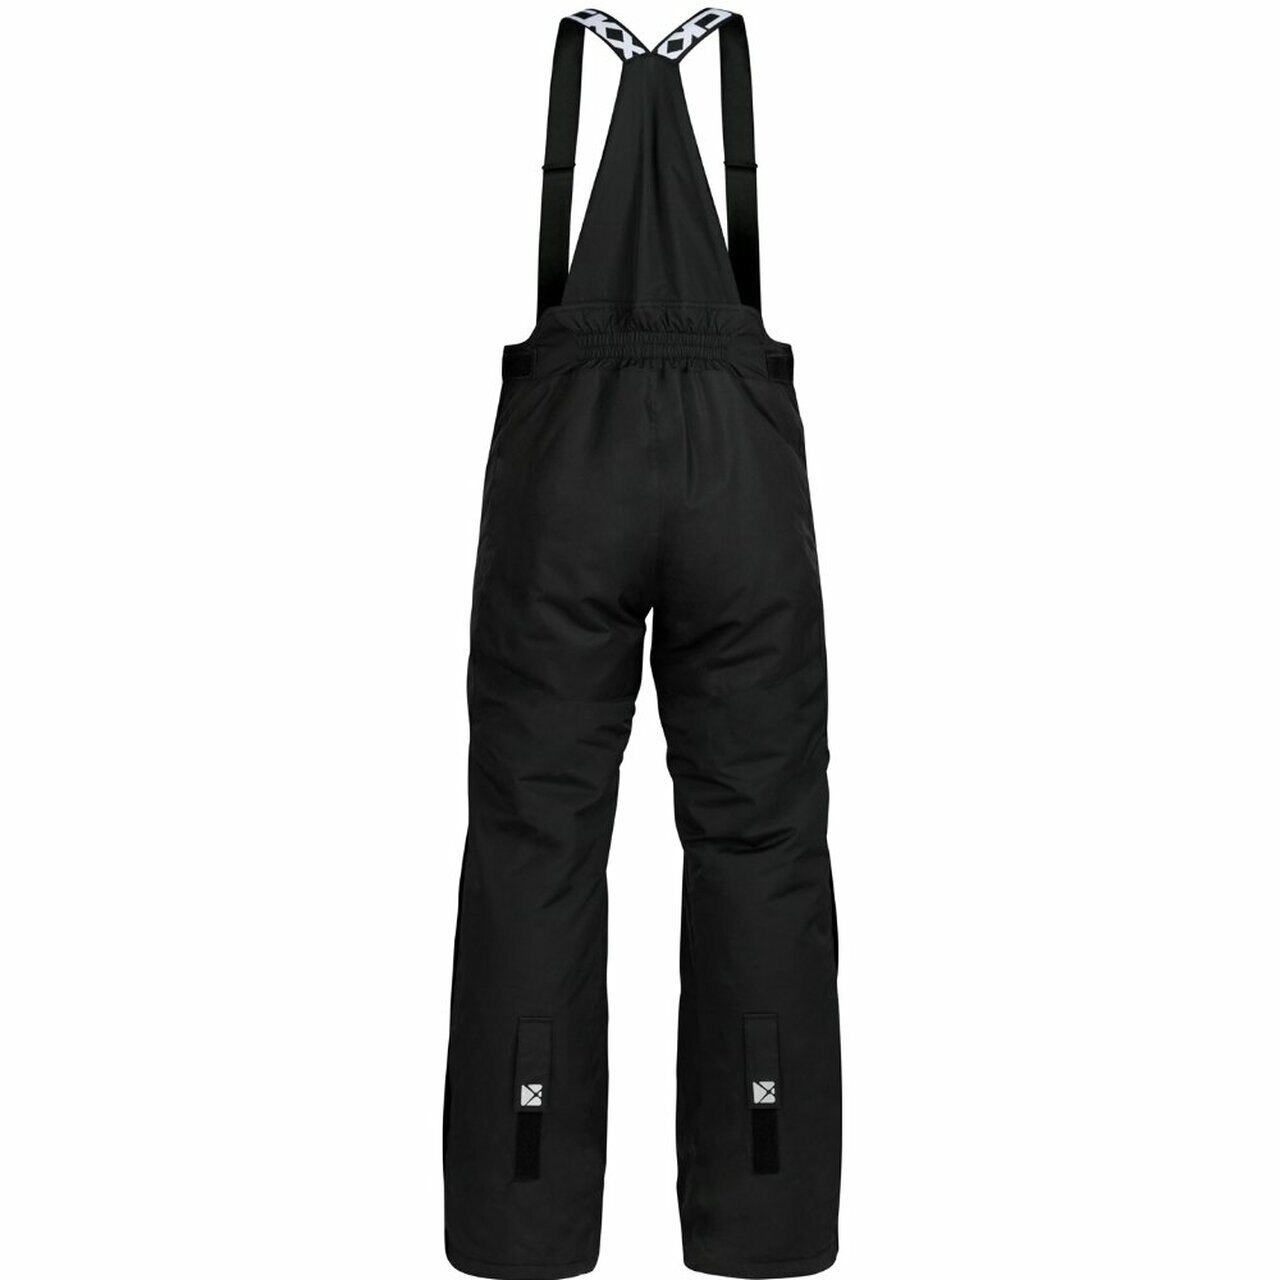 CKX MENS JOURNEY INSULATED PANTS